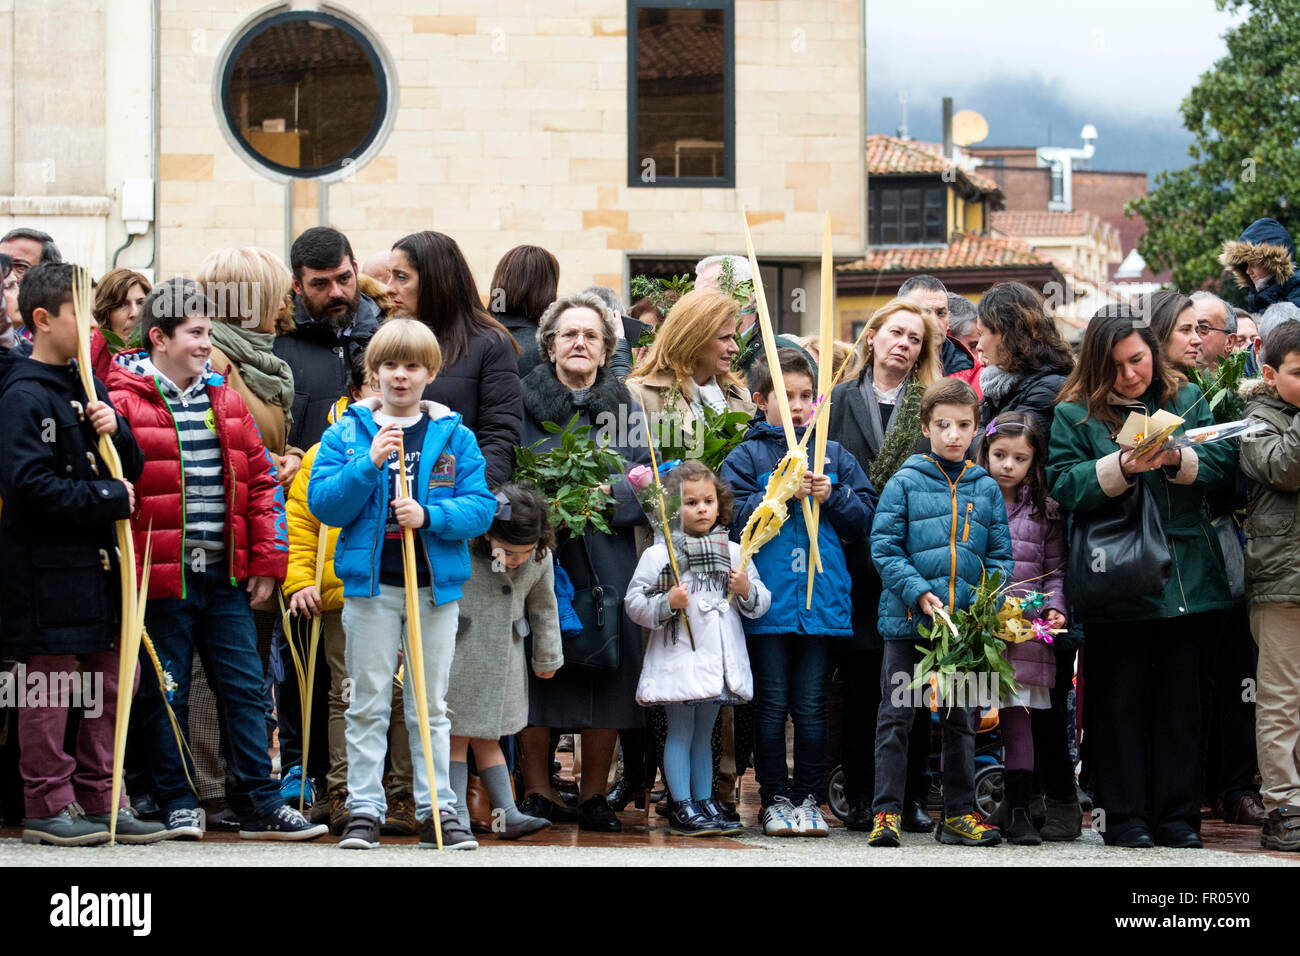 Oviedo, Spain. 20th March, 2016. Kids with palms and laurel during the blessing of palms at Palm Sunday, that commemorates Jesus' triumphal entry into Jerusalem, on March 20, 2016 in Oviedo, Spain. Credit:  David Gato/Alamy Live News Stock Photo